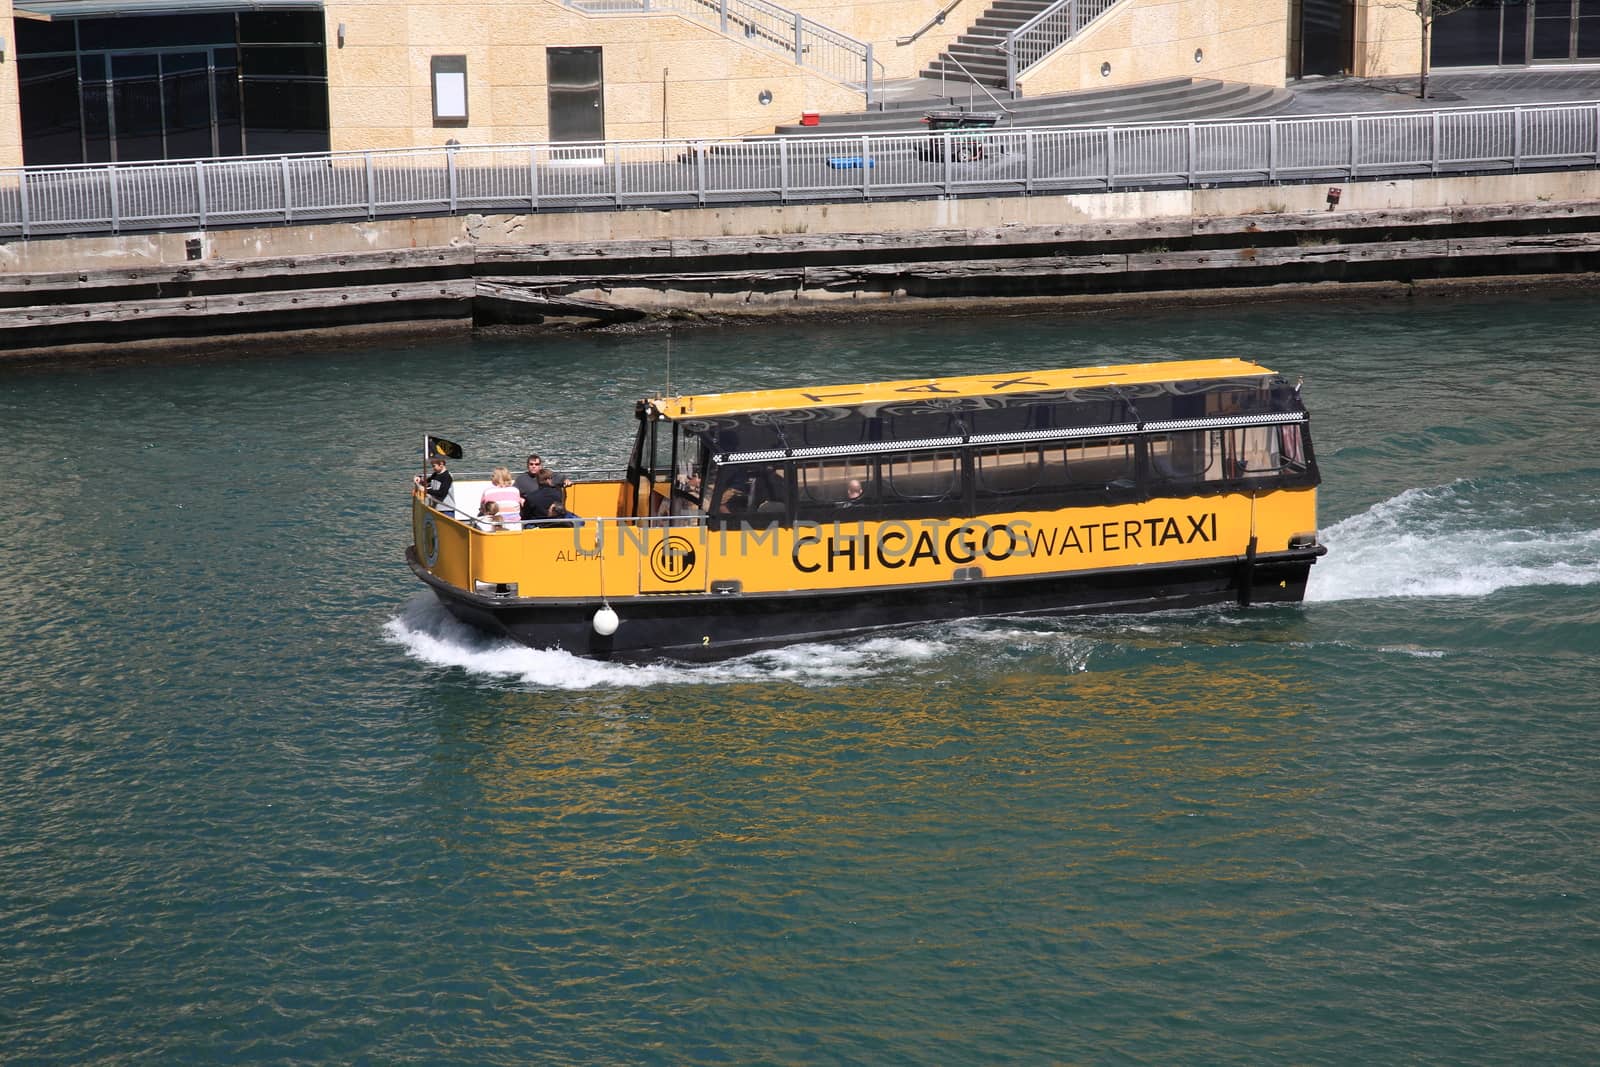 Chicago Water Taxi by Ffooter